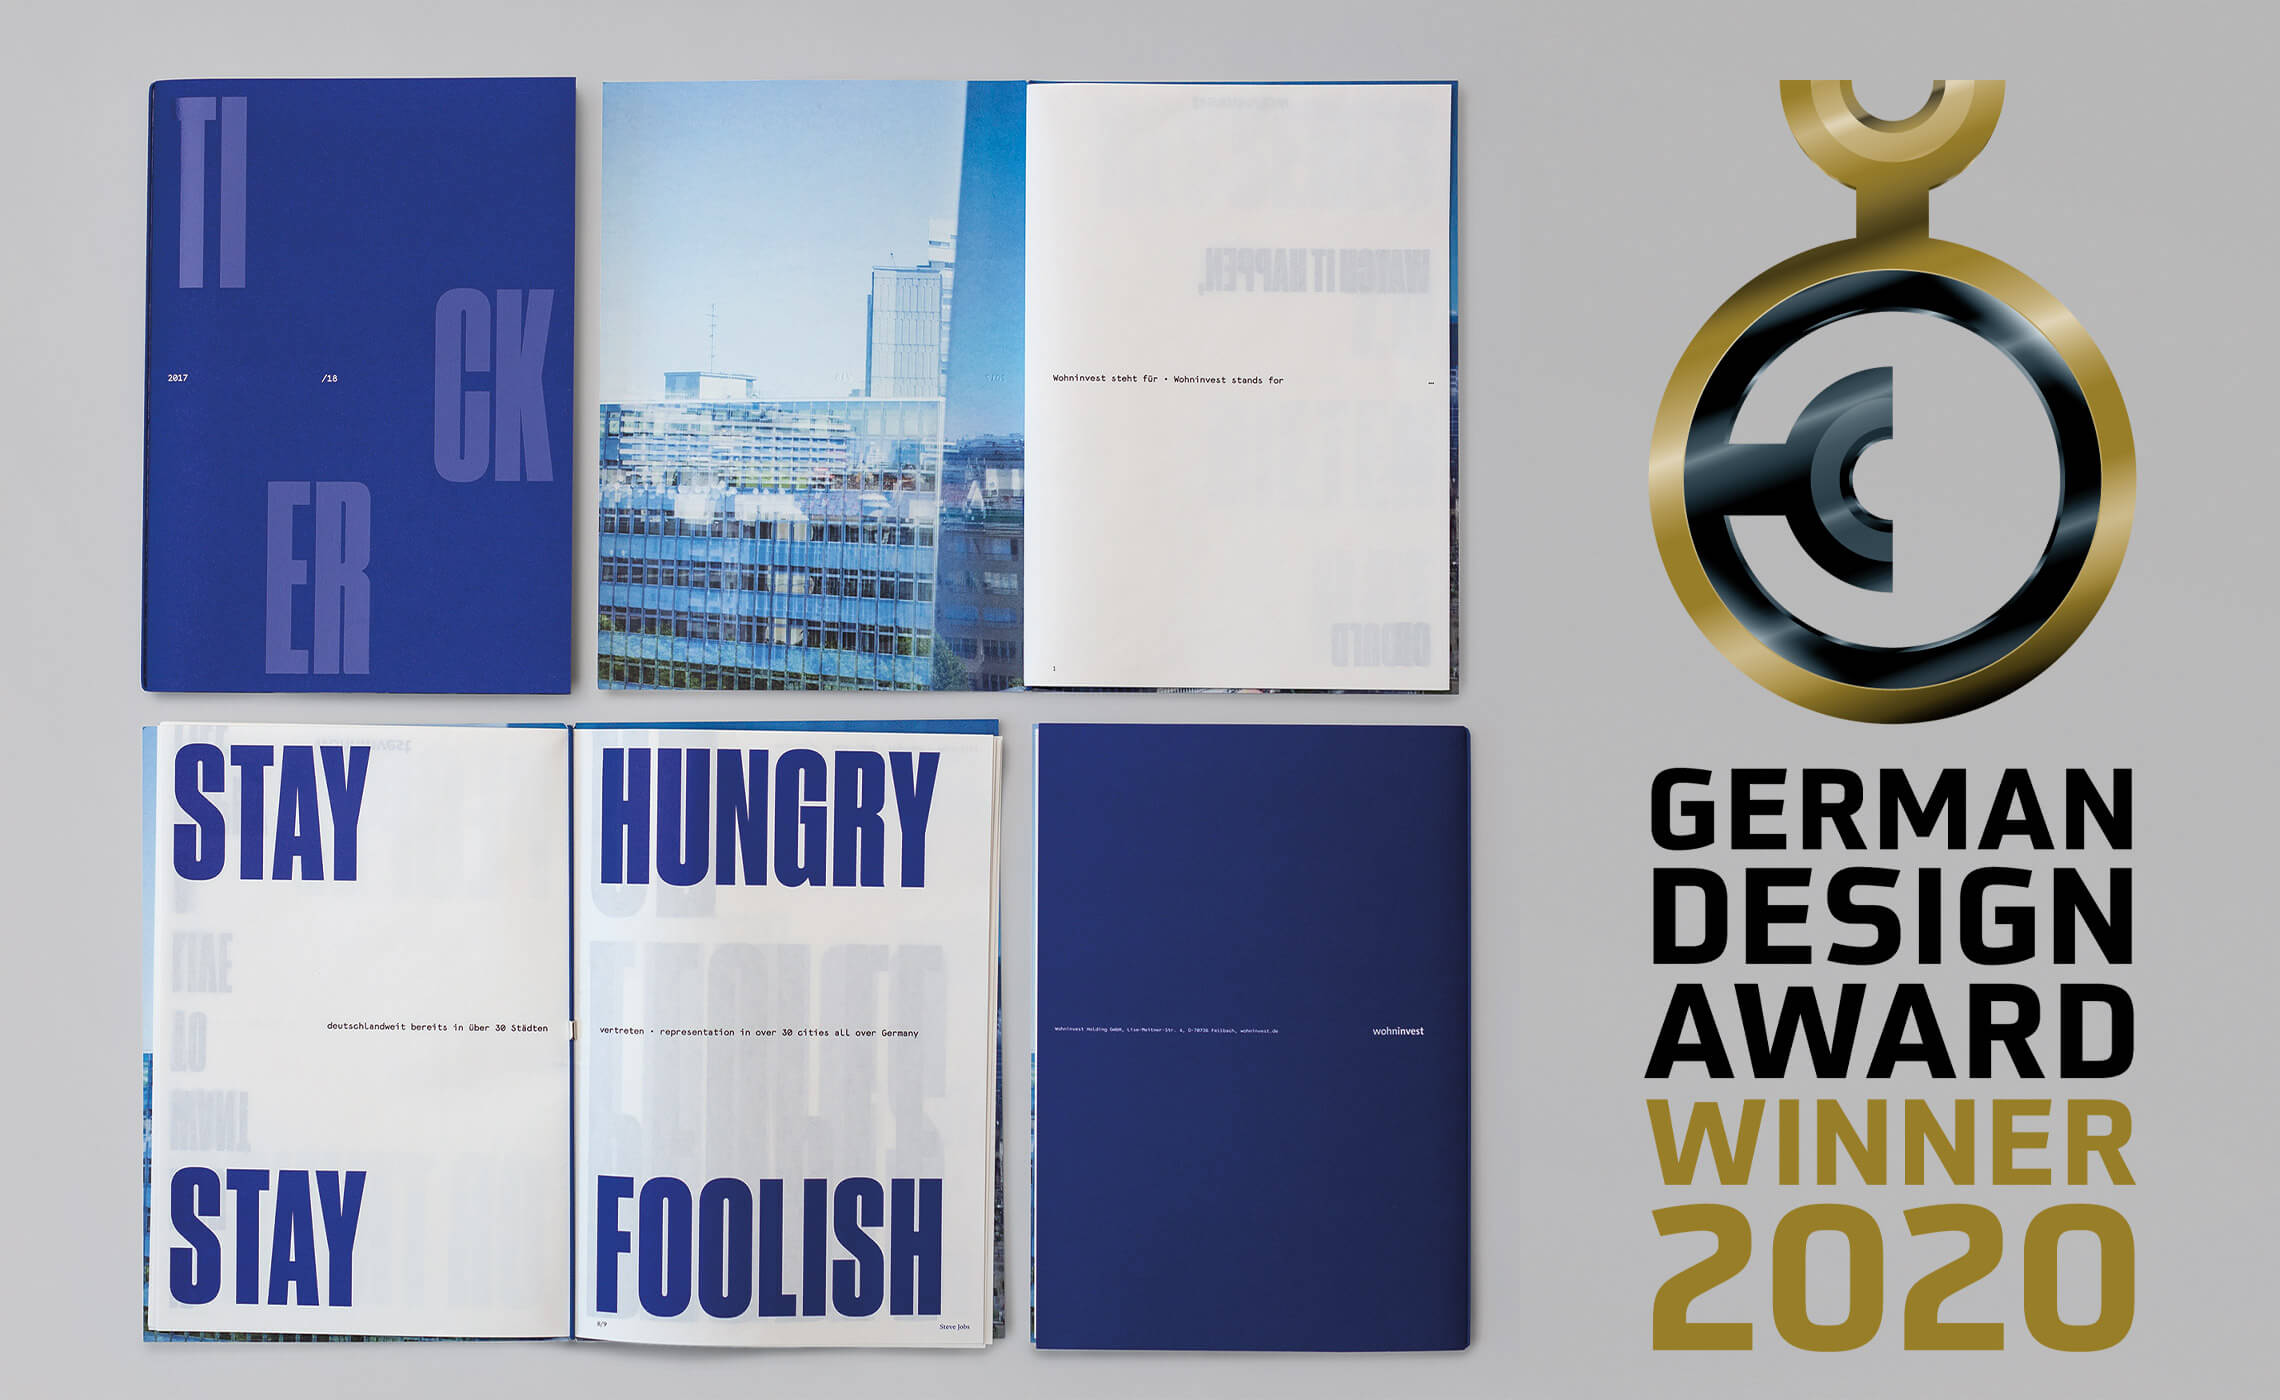 This picture shows the Wohninvest image brochure unfolded and as a unfolded poster with the logo of the German Design Award.